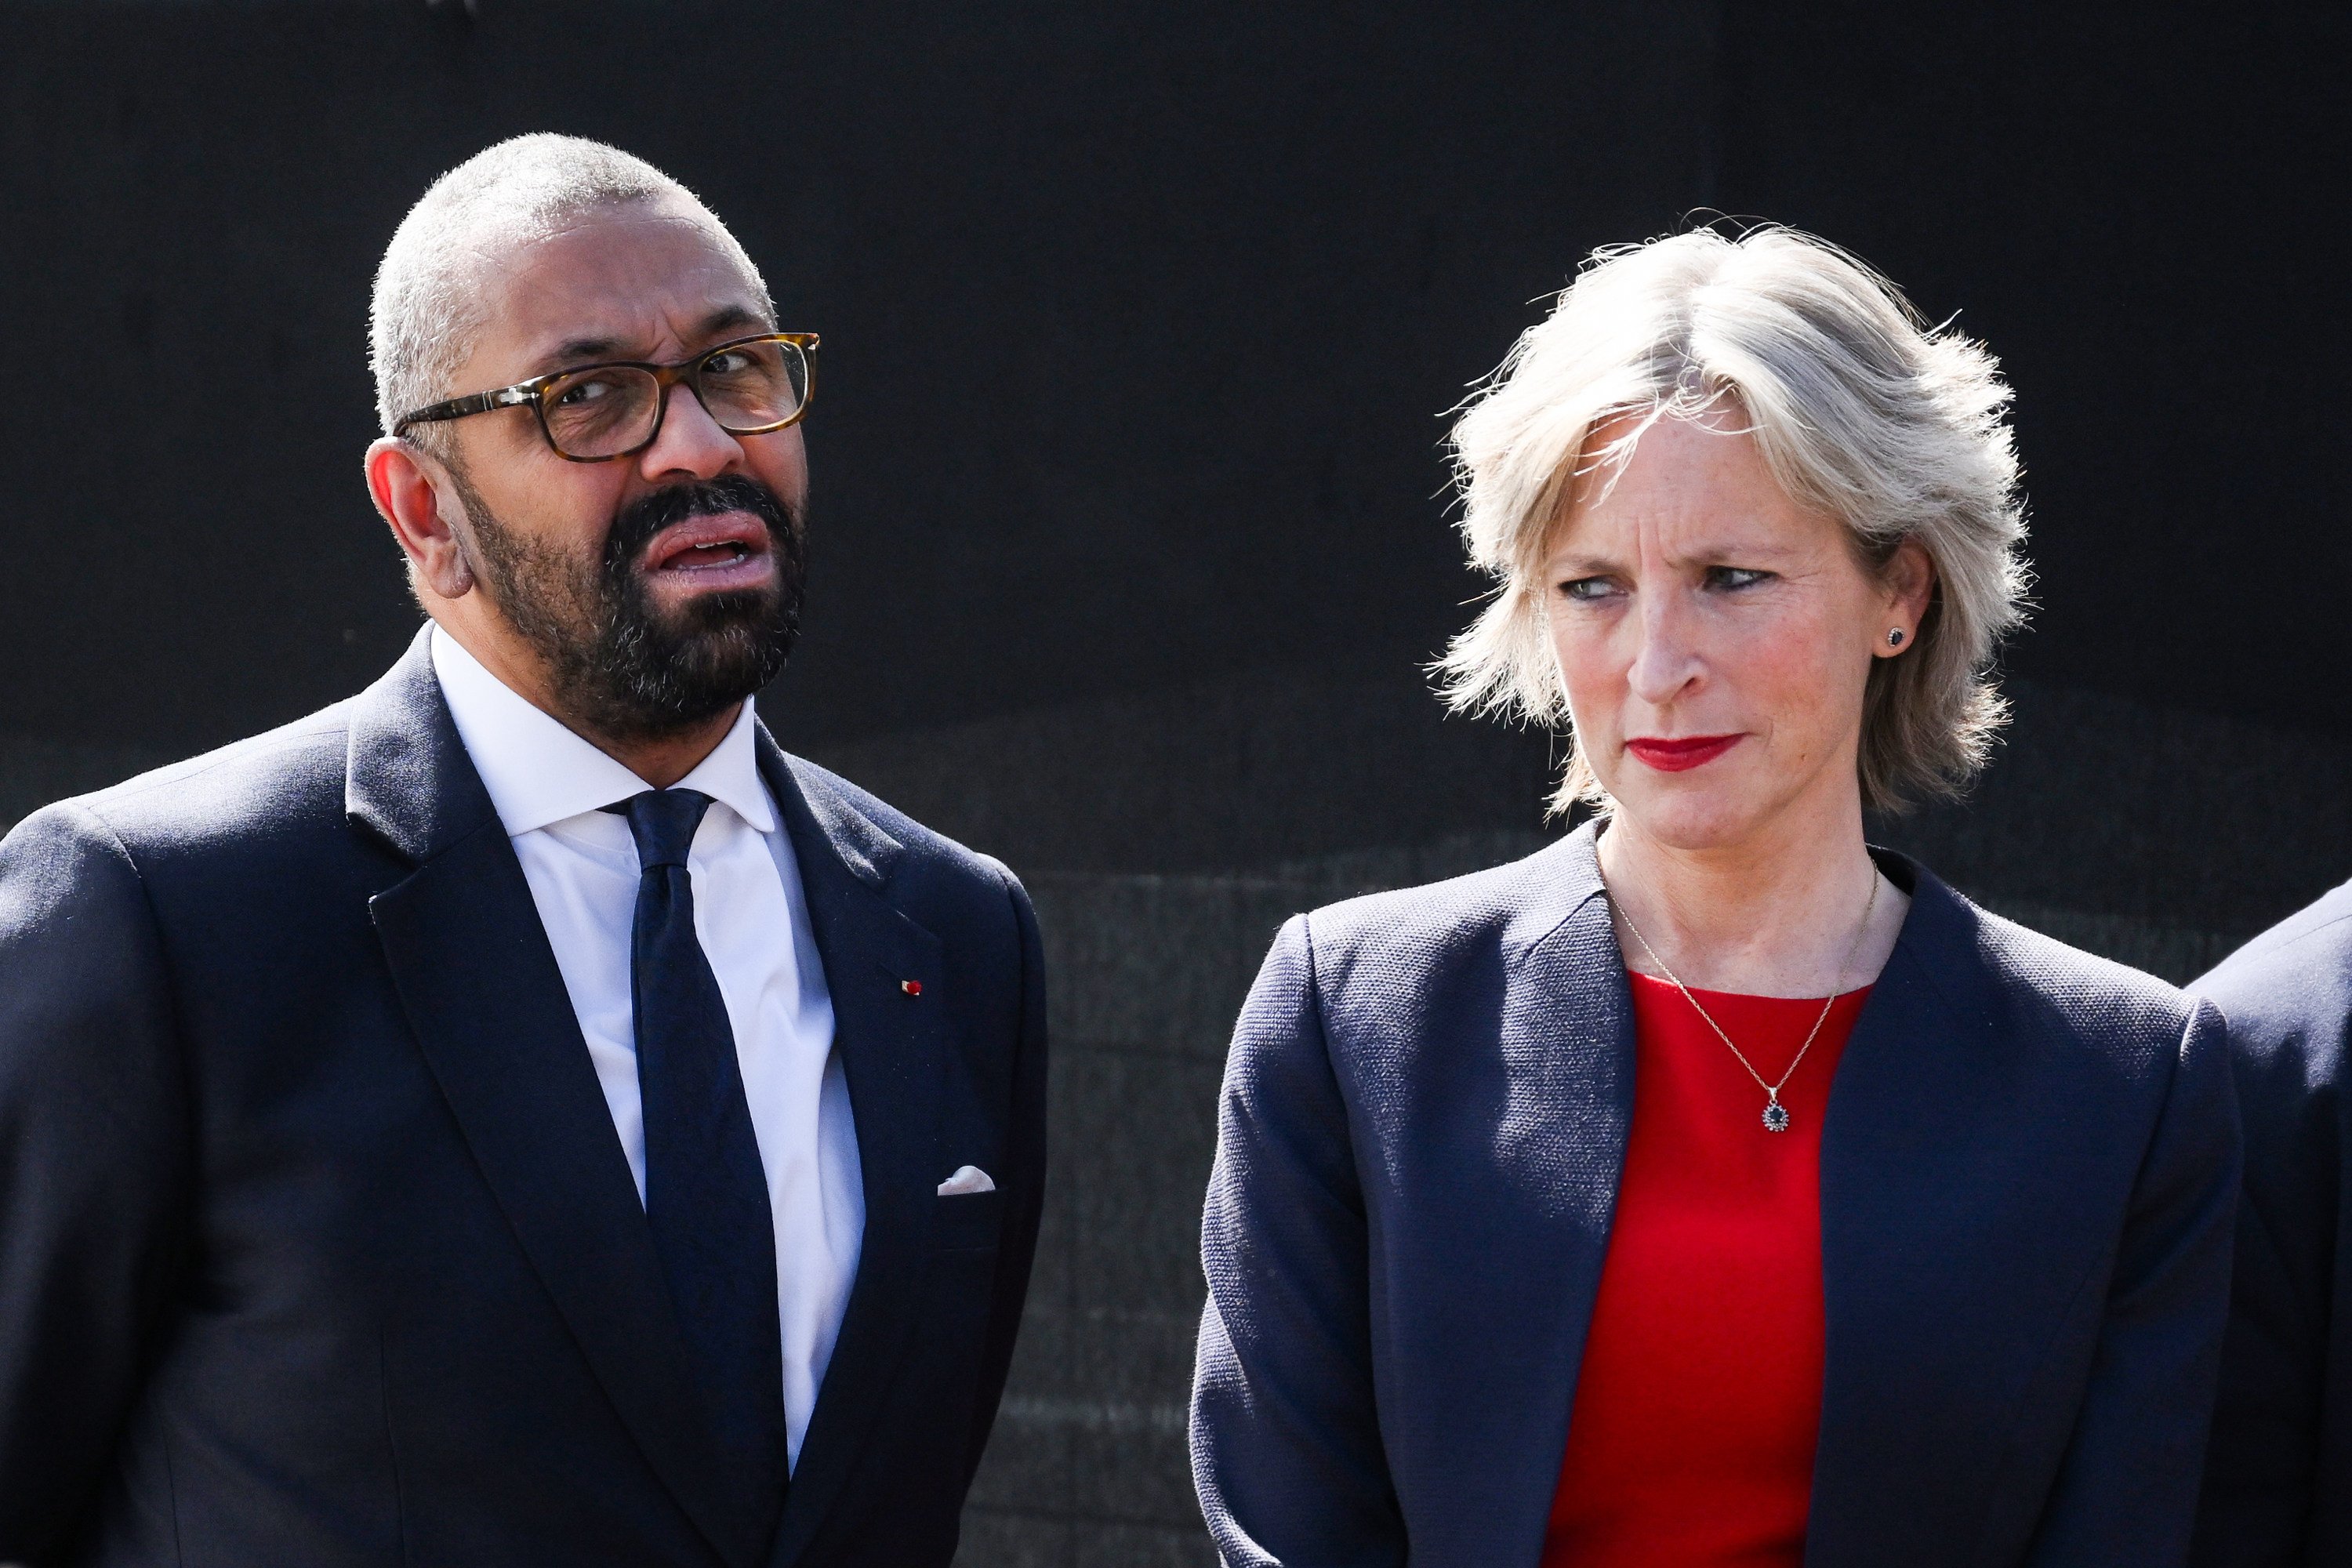 Britain’s Home Secretary James Cleverly and his wife Susannah Cleverly. Photo: PA Wire / dpa